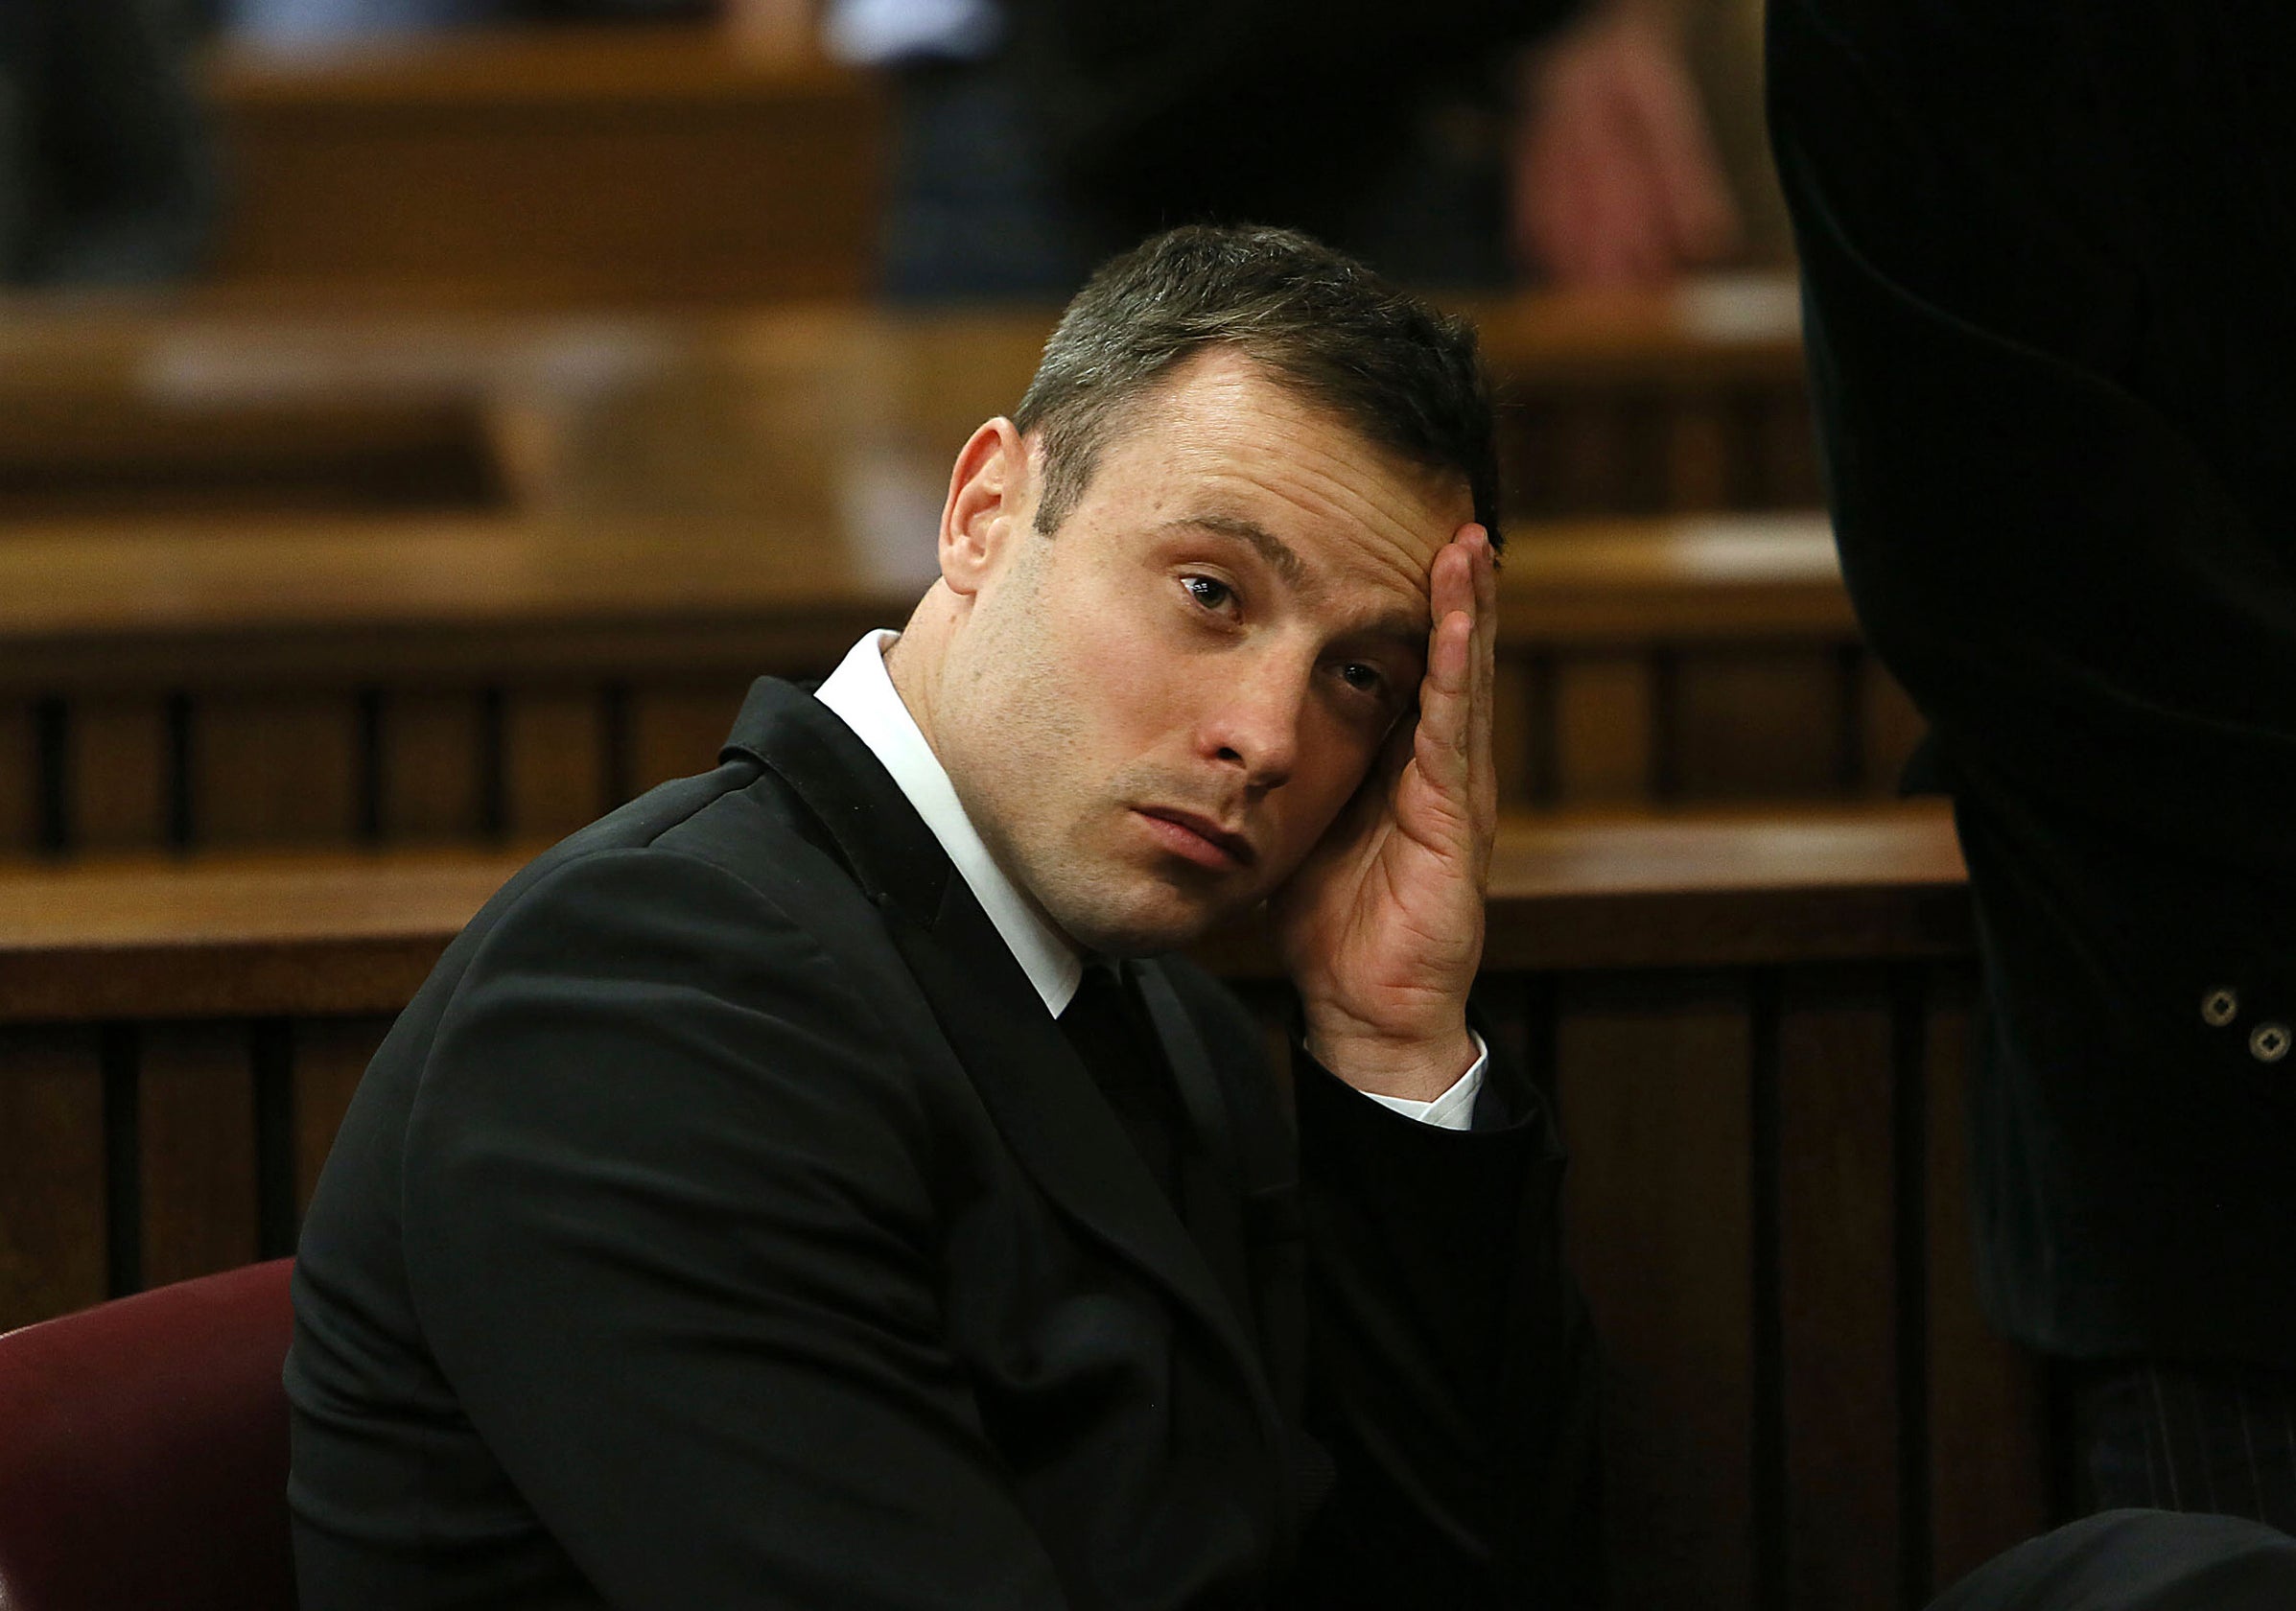 Oscar Pistorius could secure an early release from prison